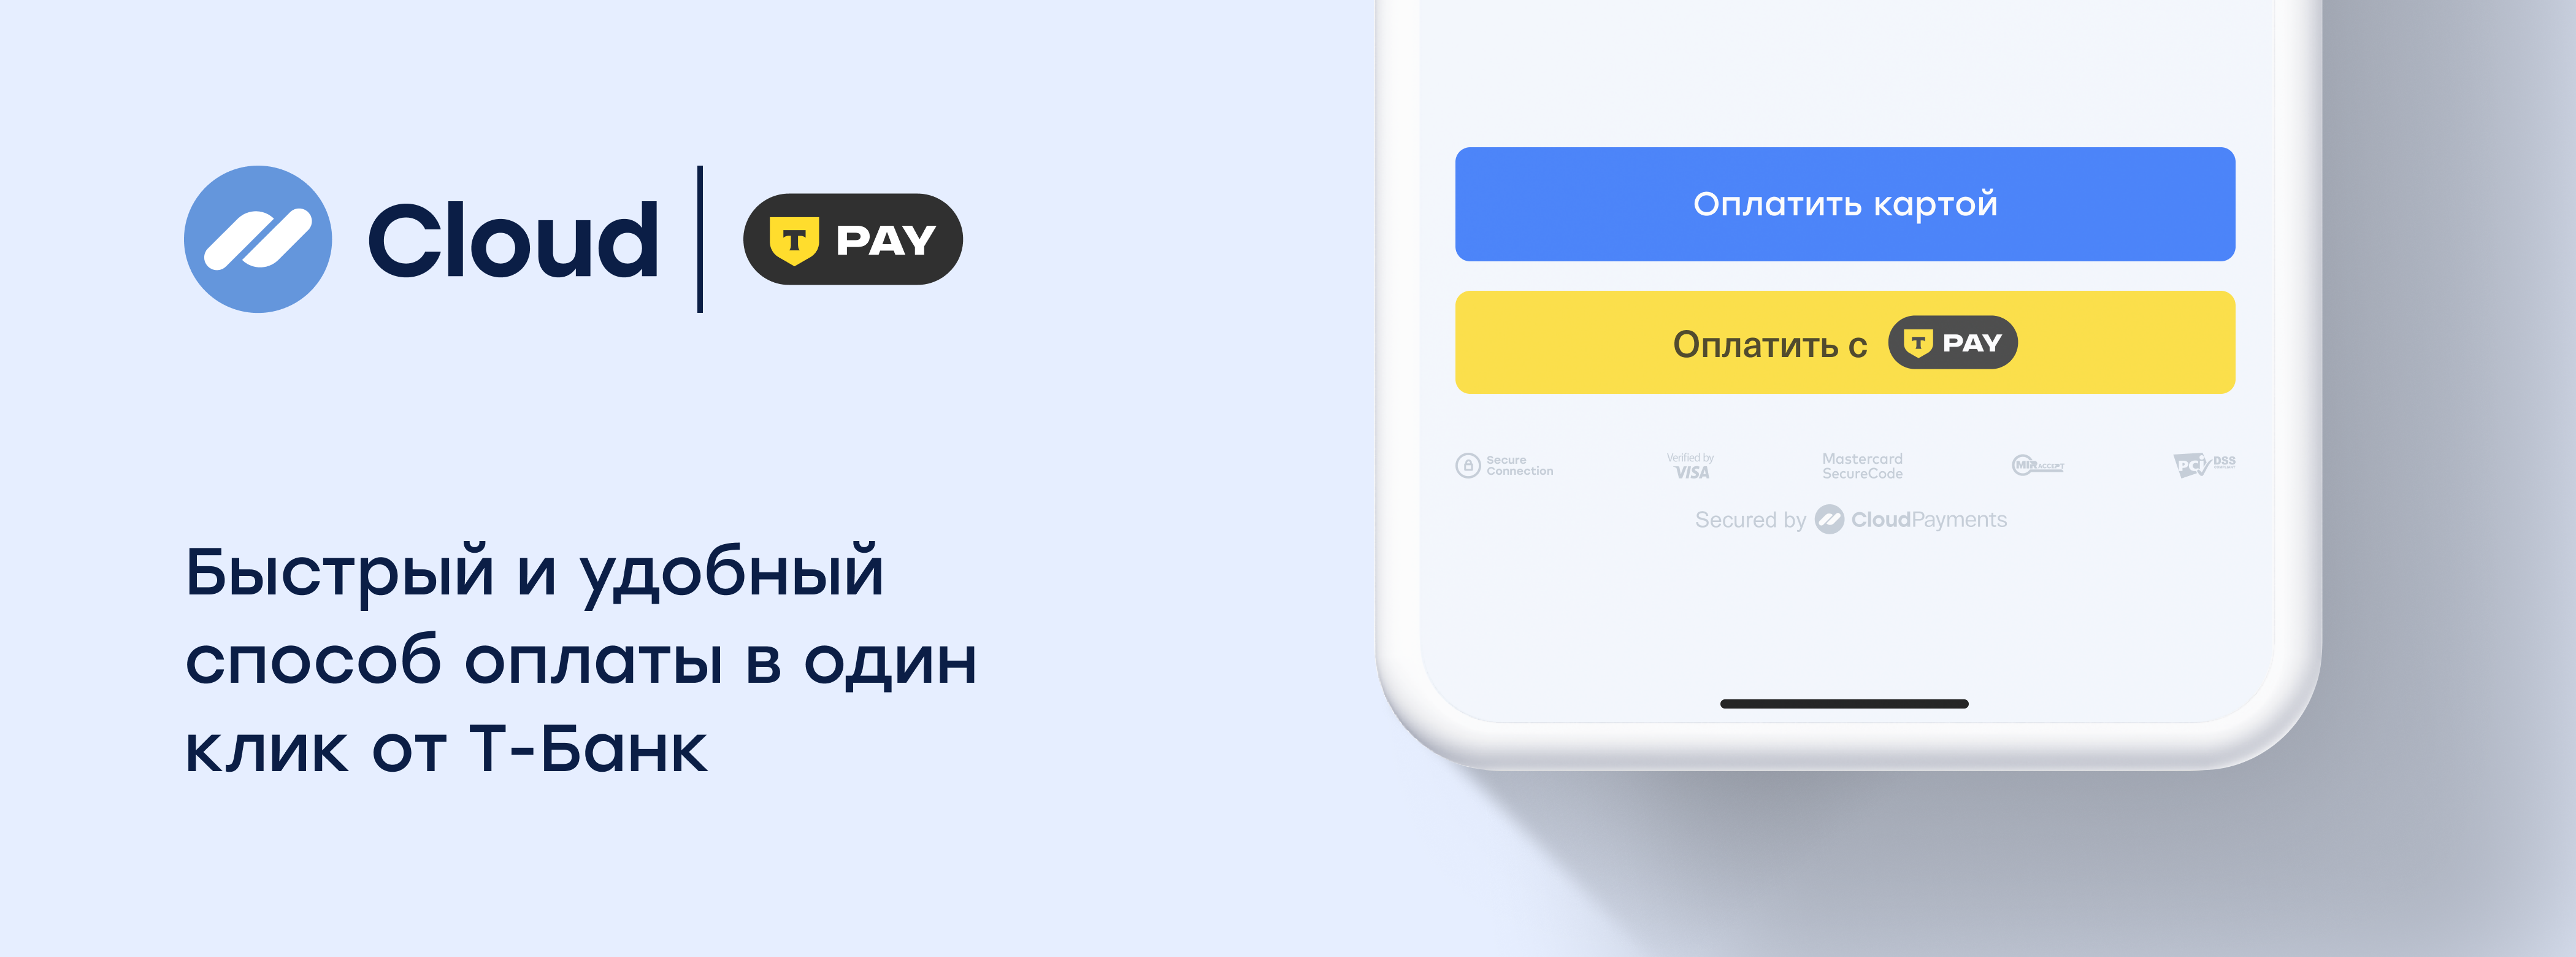 tinkoffpay_cloud